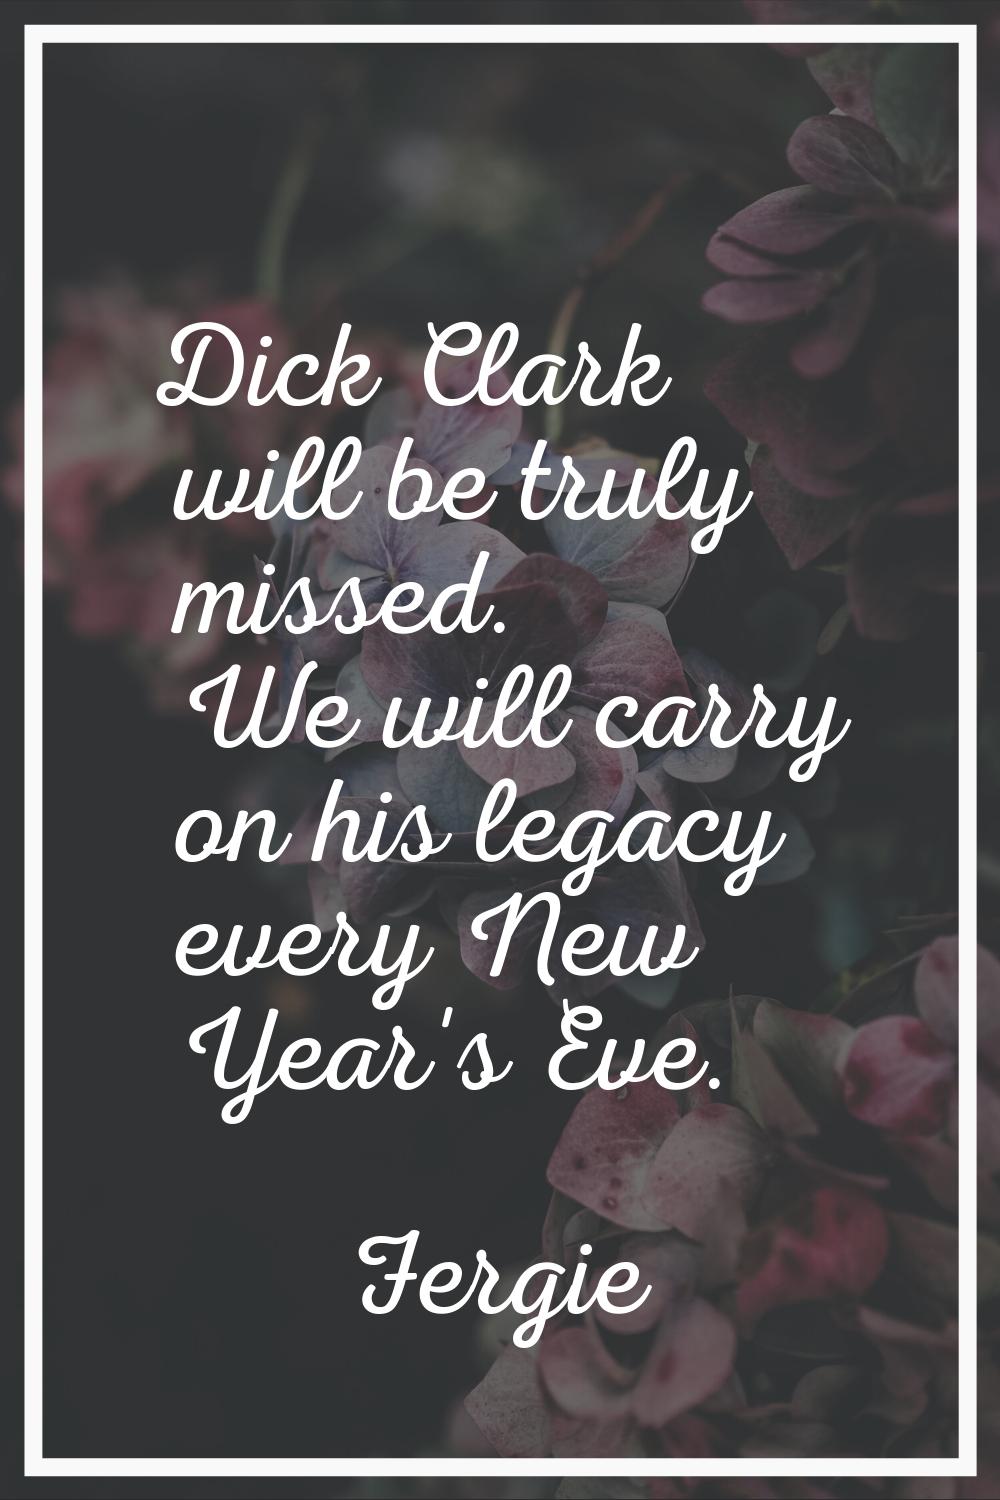 Dick Clark will be truly missed. We will carry on his legacy every New Year's Eve.